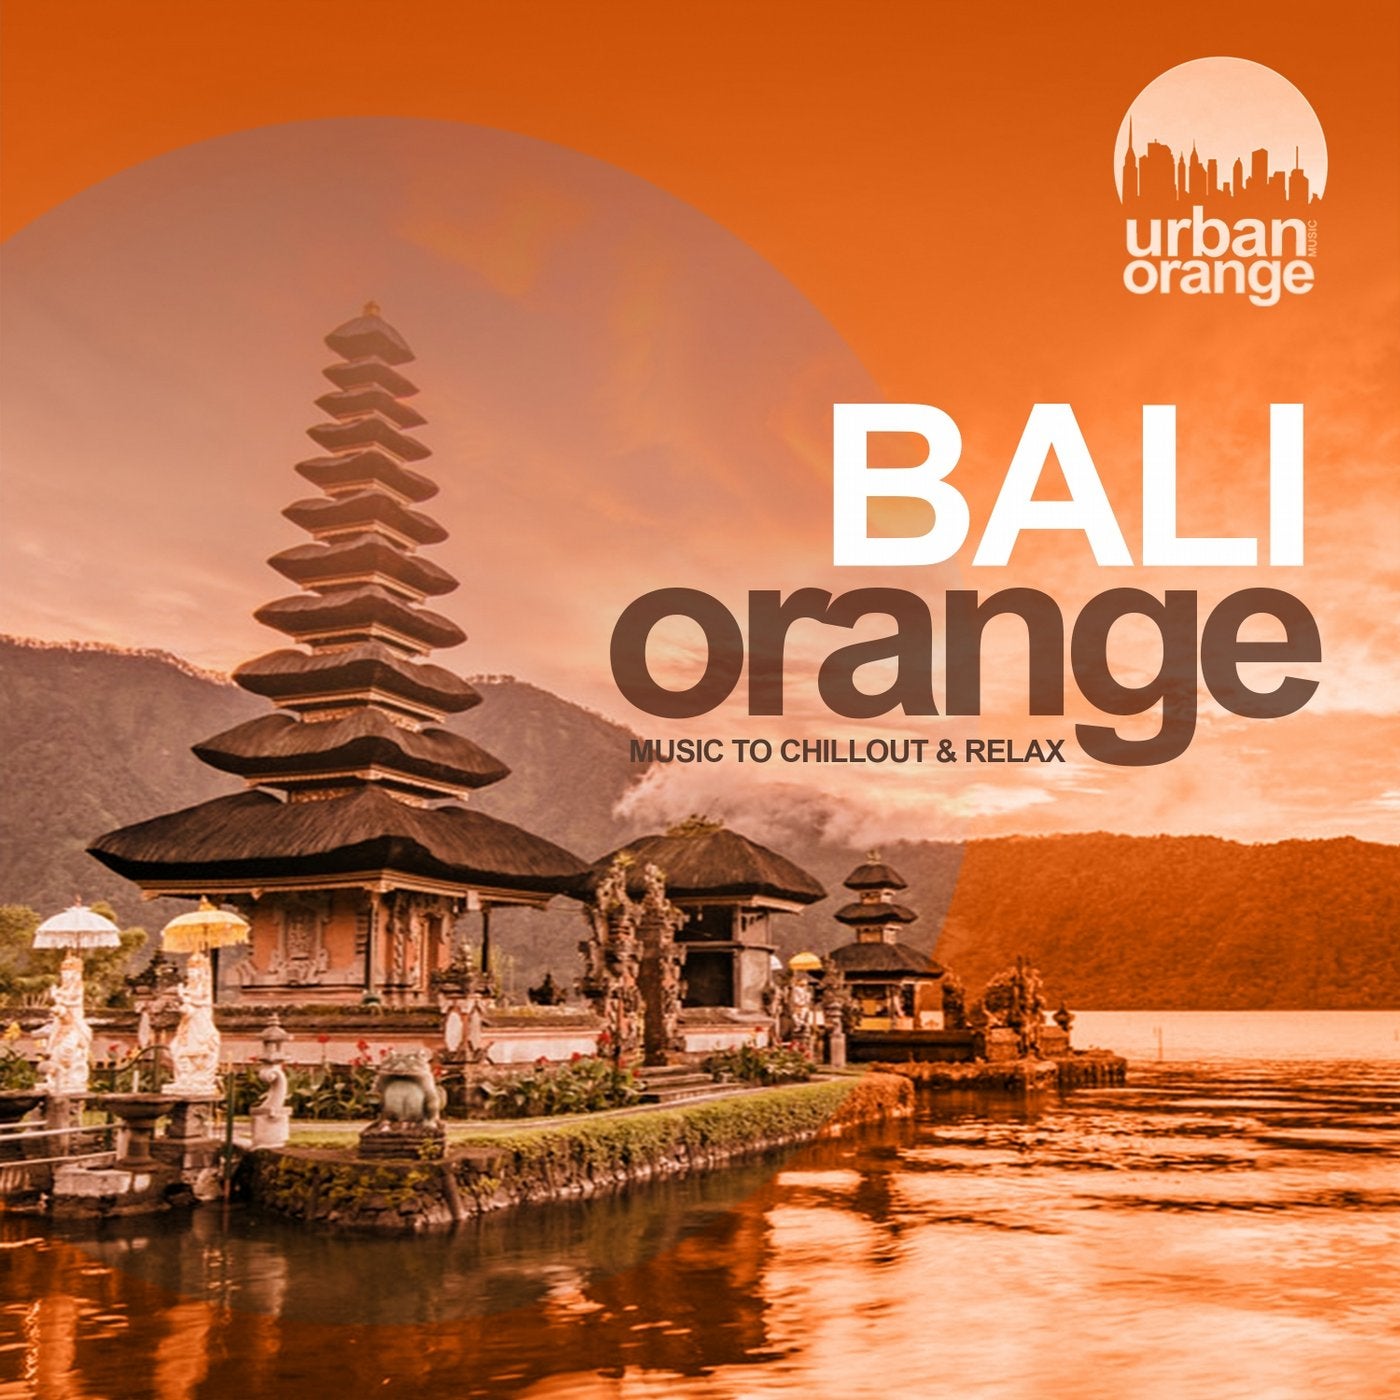 Bali Orange (Music to Chillout & Relax)